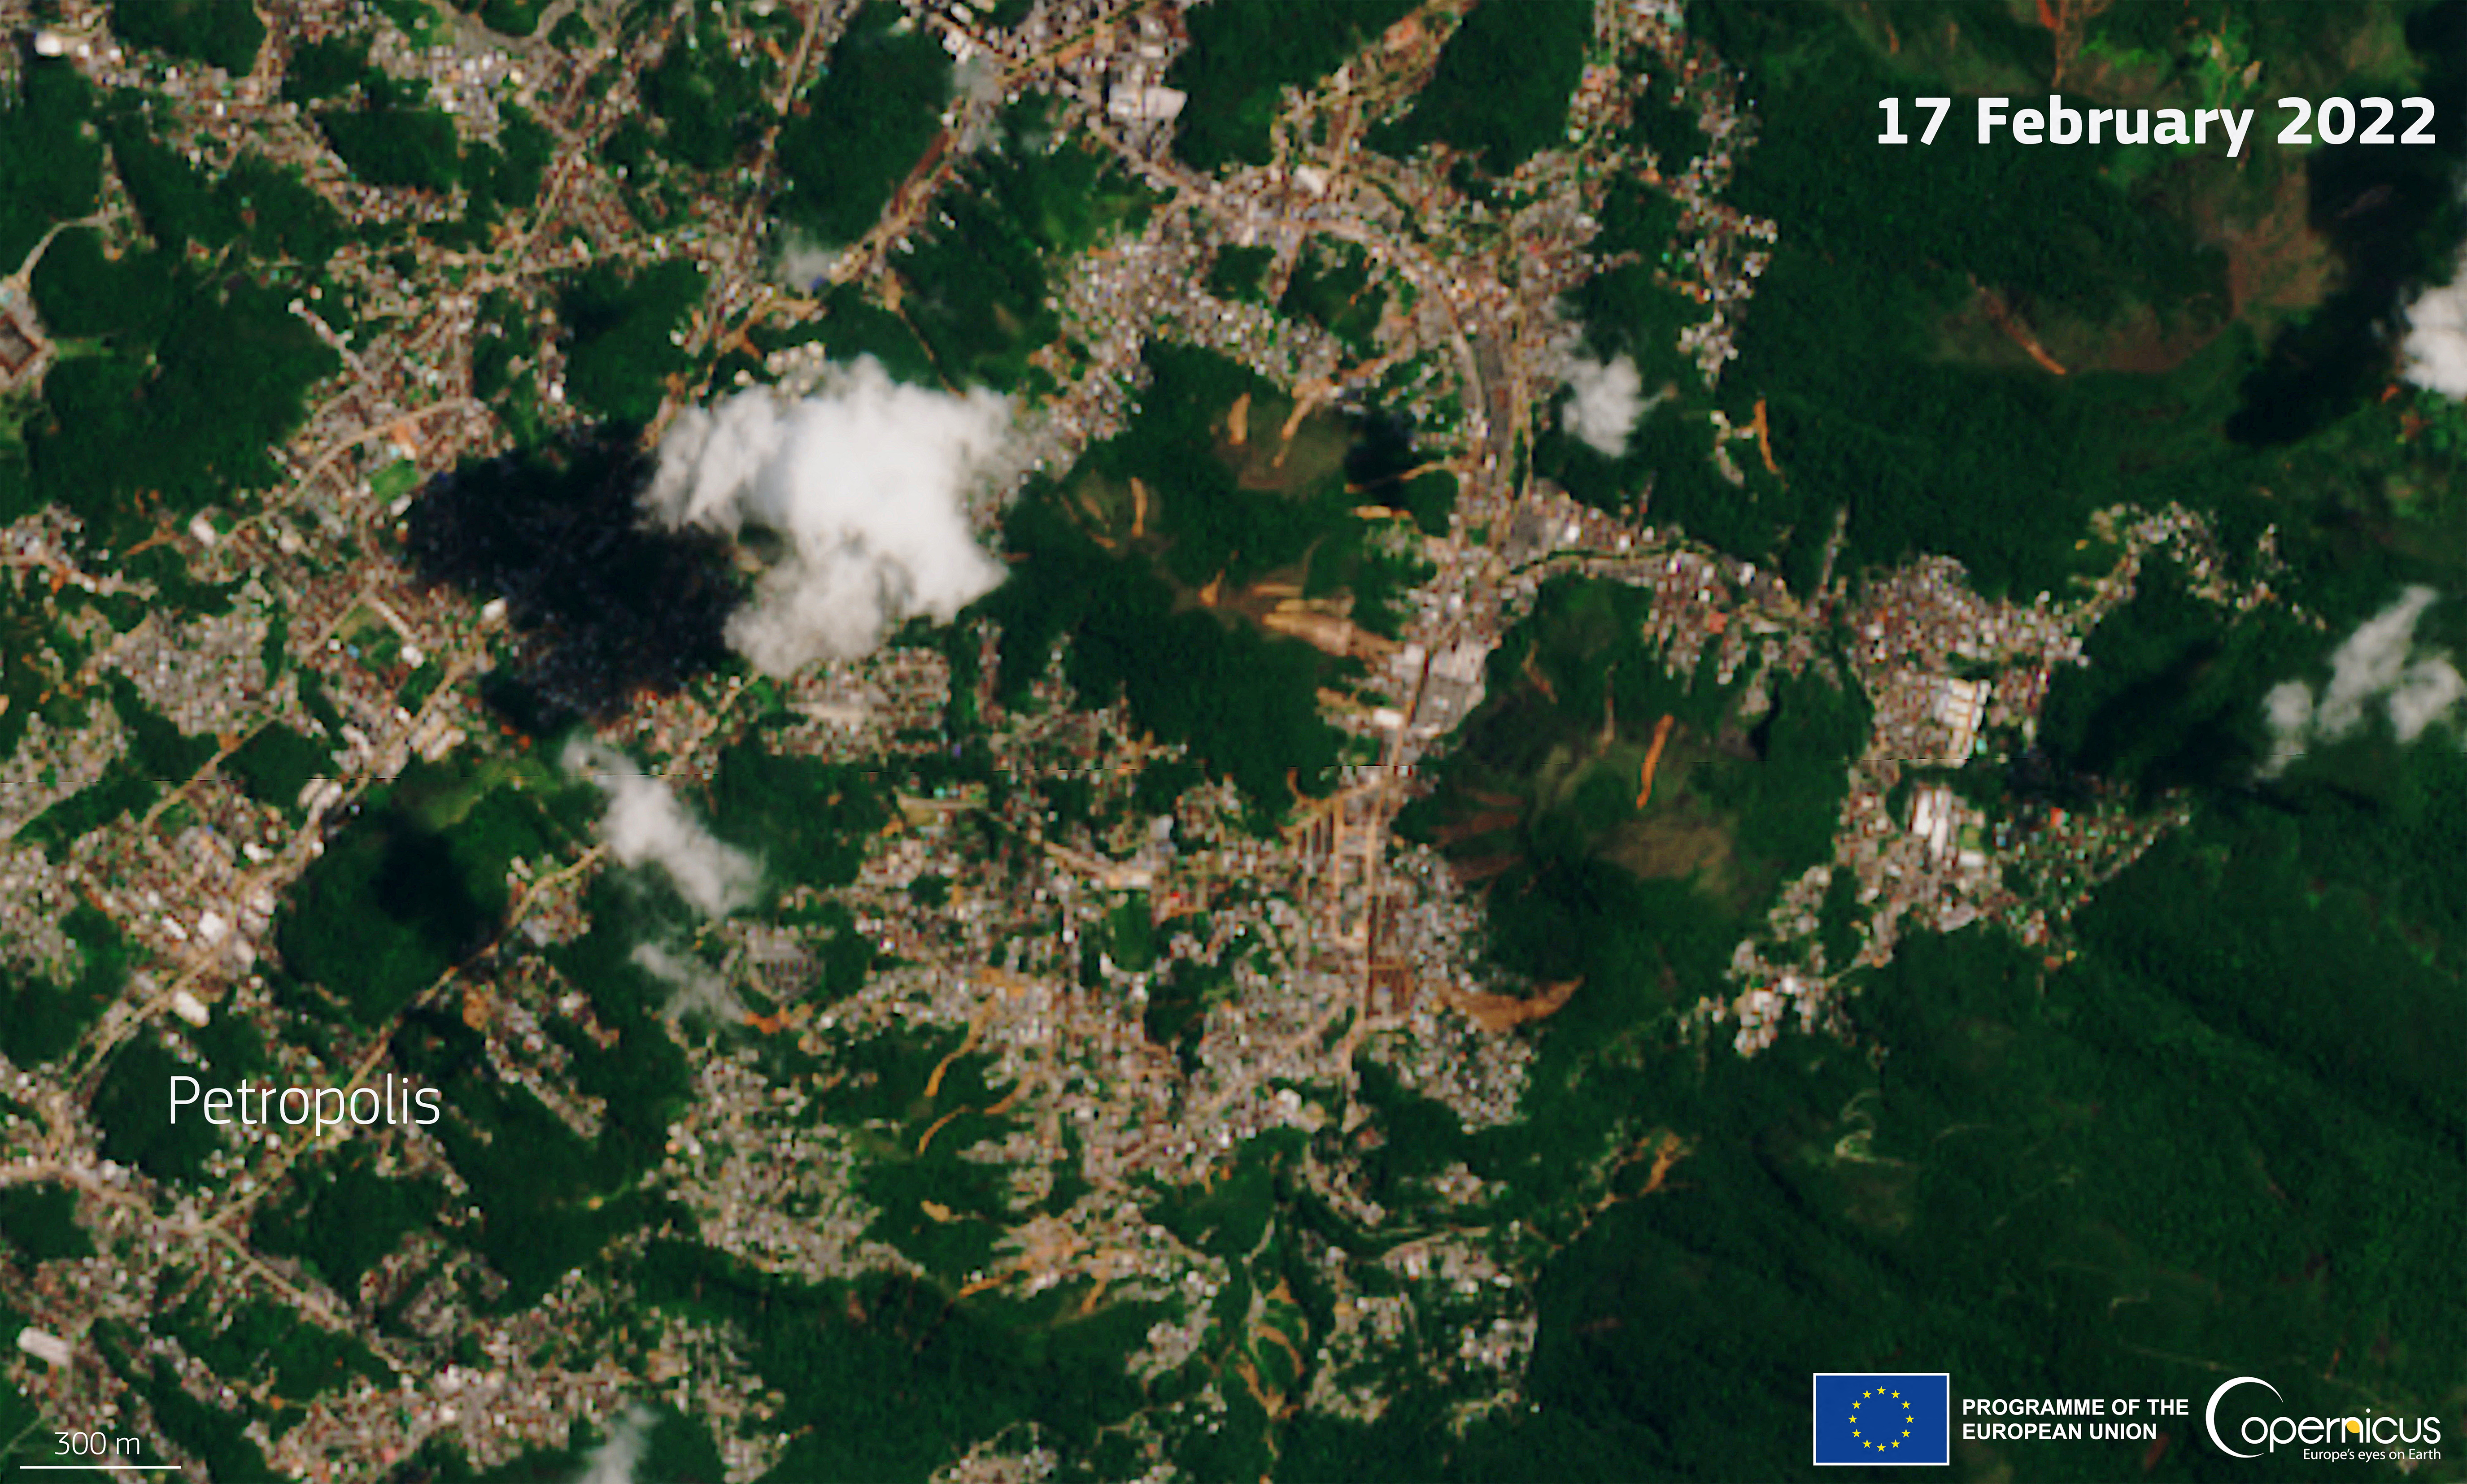 A satellite image shows landslides at an area affected by floods in Petropolis